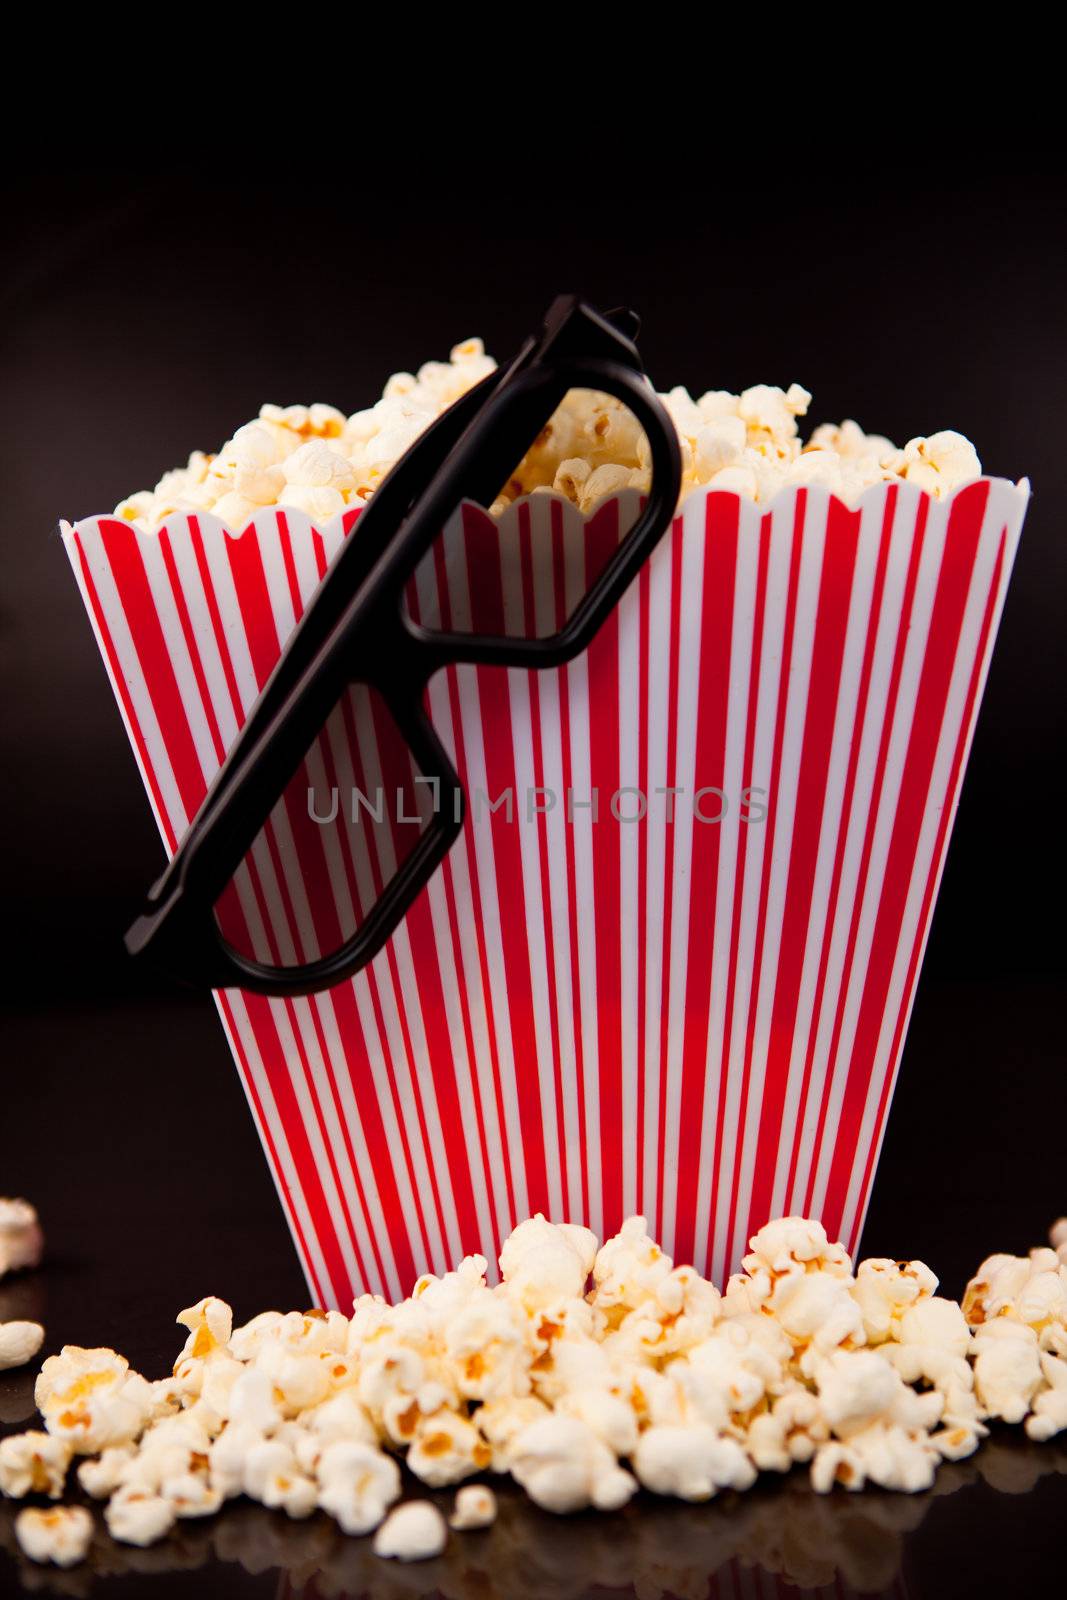 3D glasses hanging on a box full of popcorn against a black background